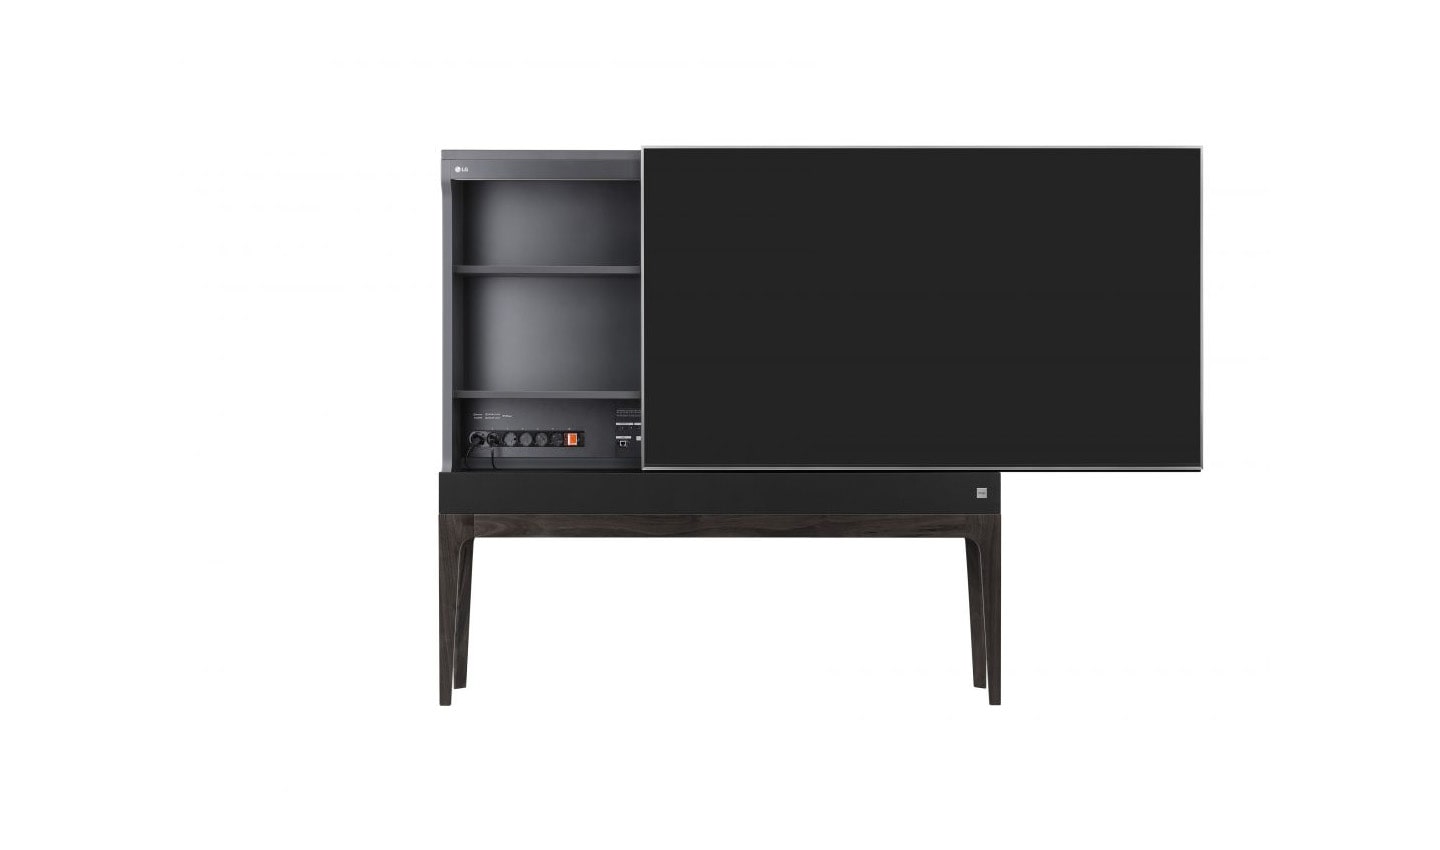 Front view of LG OBJET TV with display slid to the right to reveal input connections built into cabinet